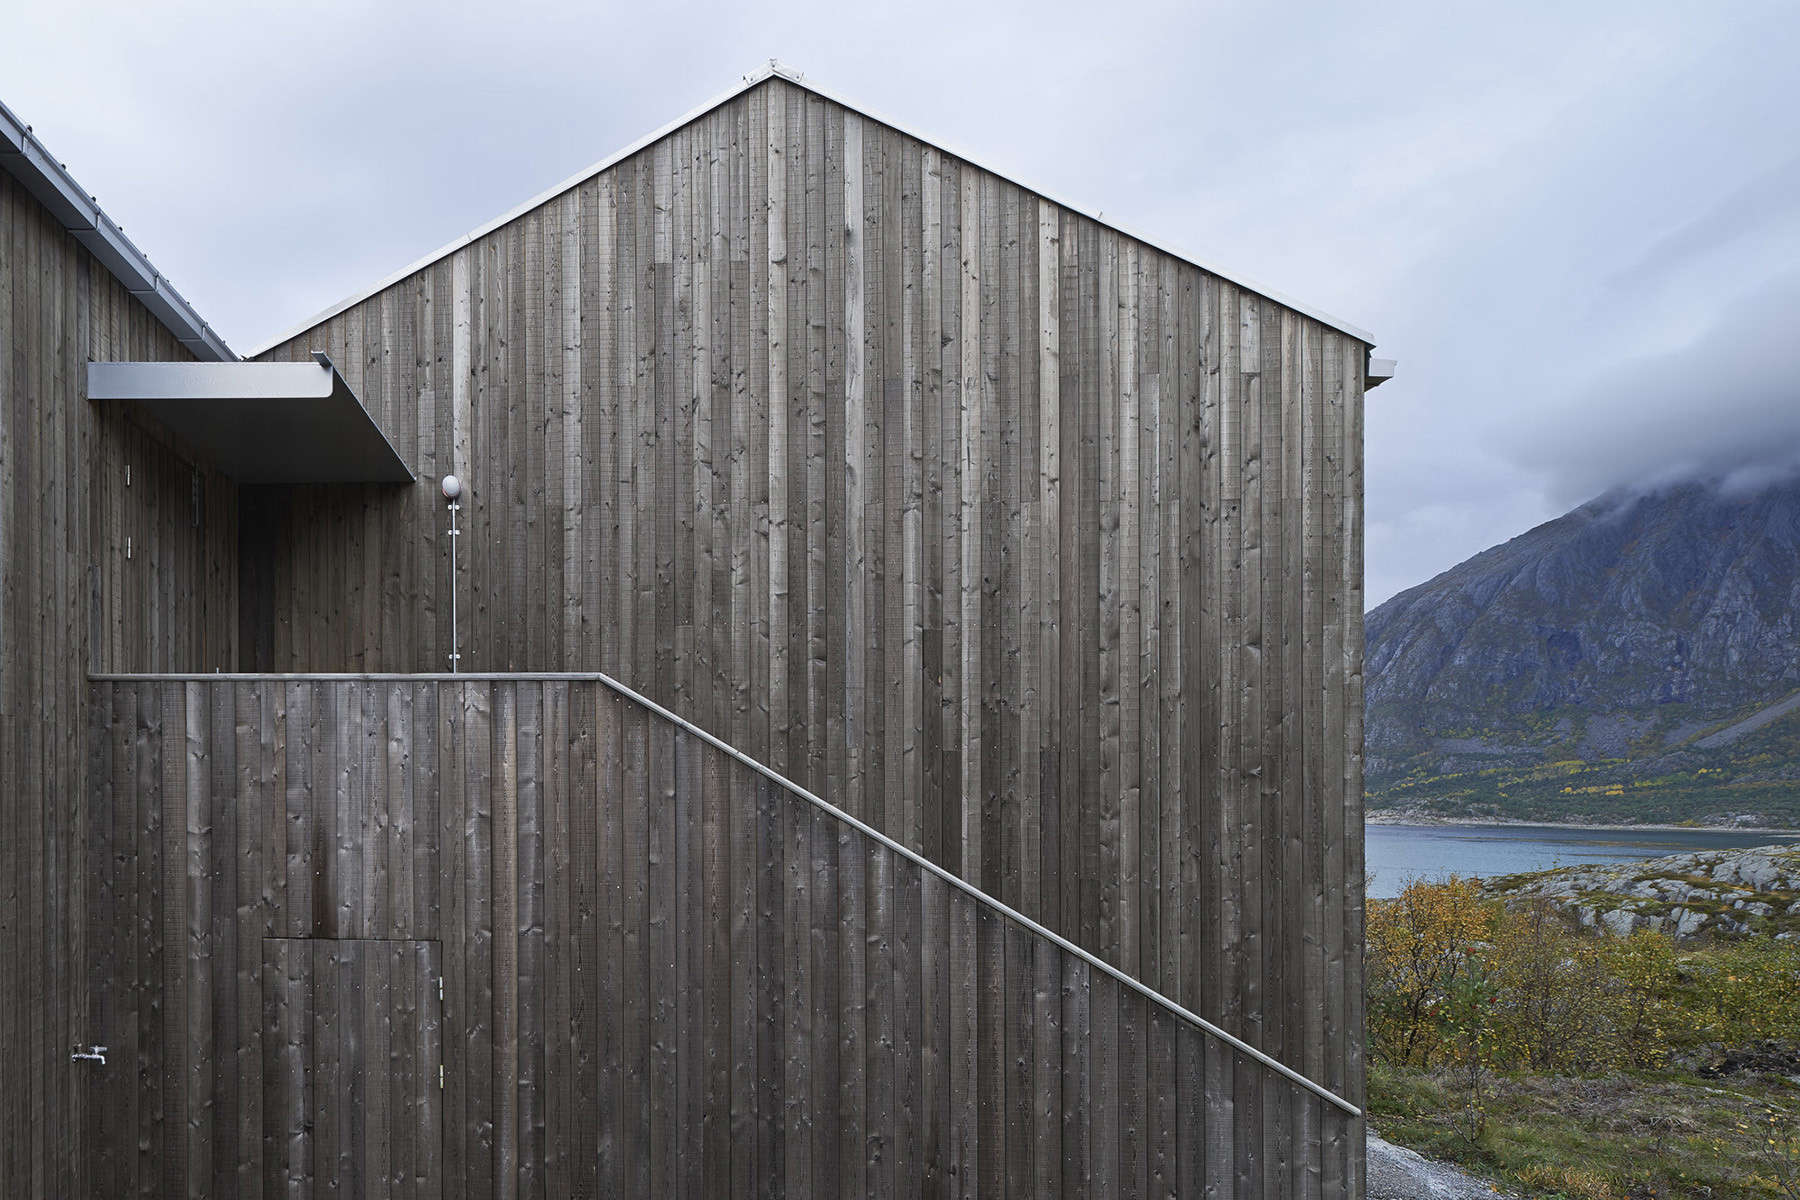 the clean, pitched roof mimics the natural peaks of nearby mountains. 10